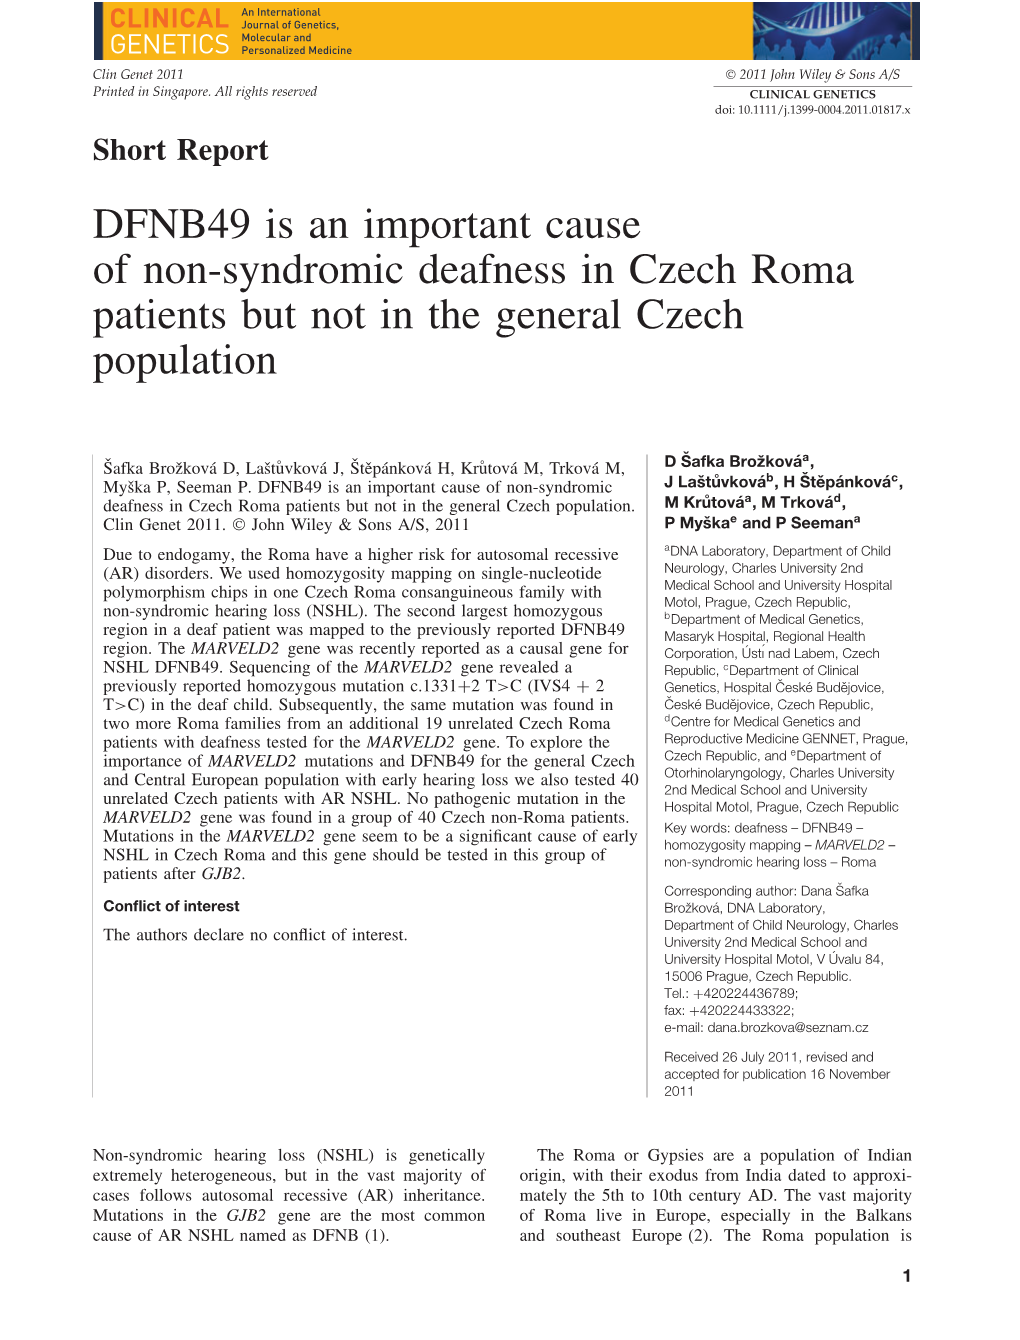 DFNB49 Is an Important Cause of Nonsyndromic Deafness in Czech